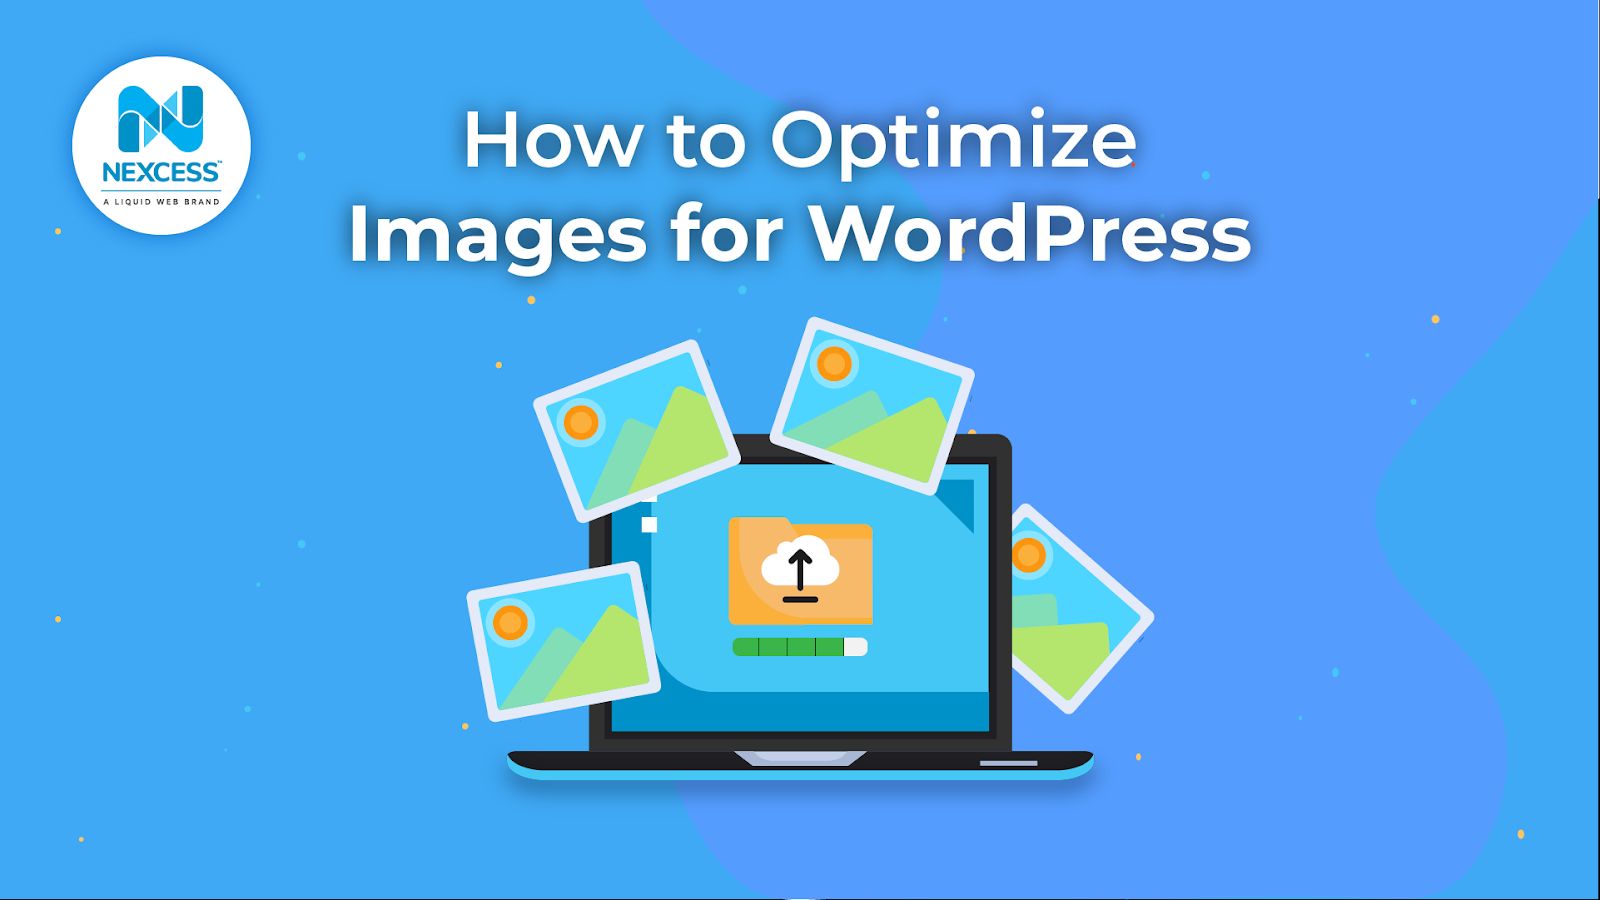 How to optimize images for WordPress and speed up your site